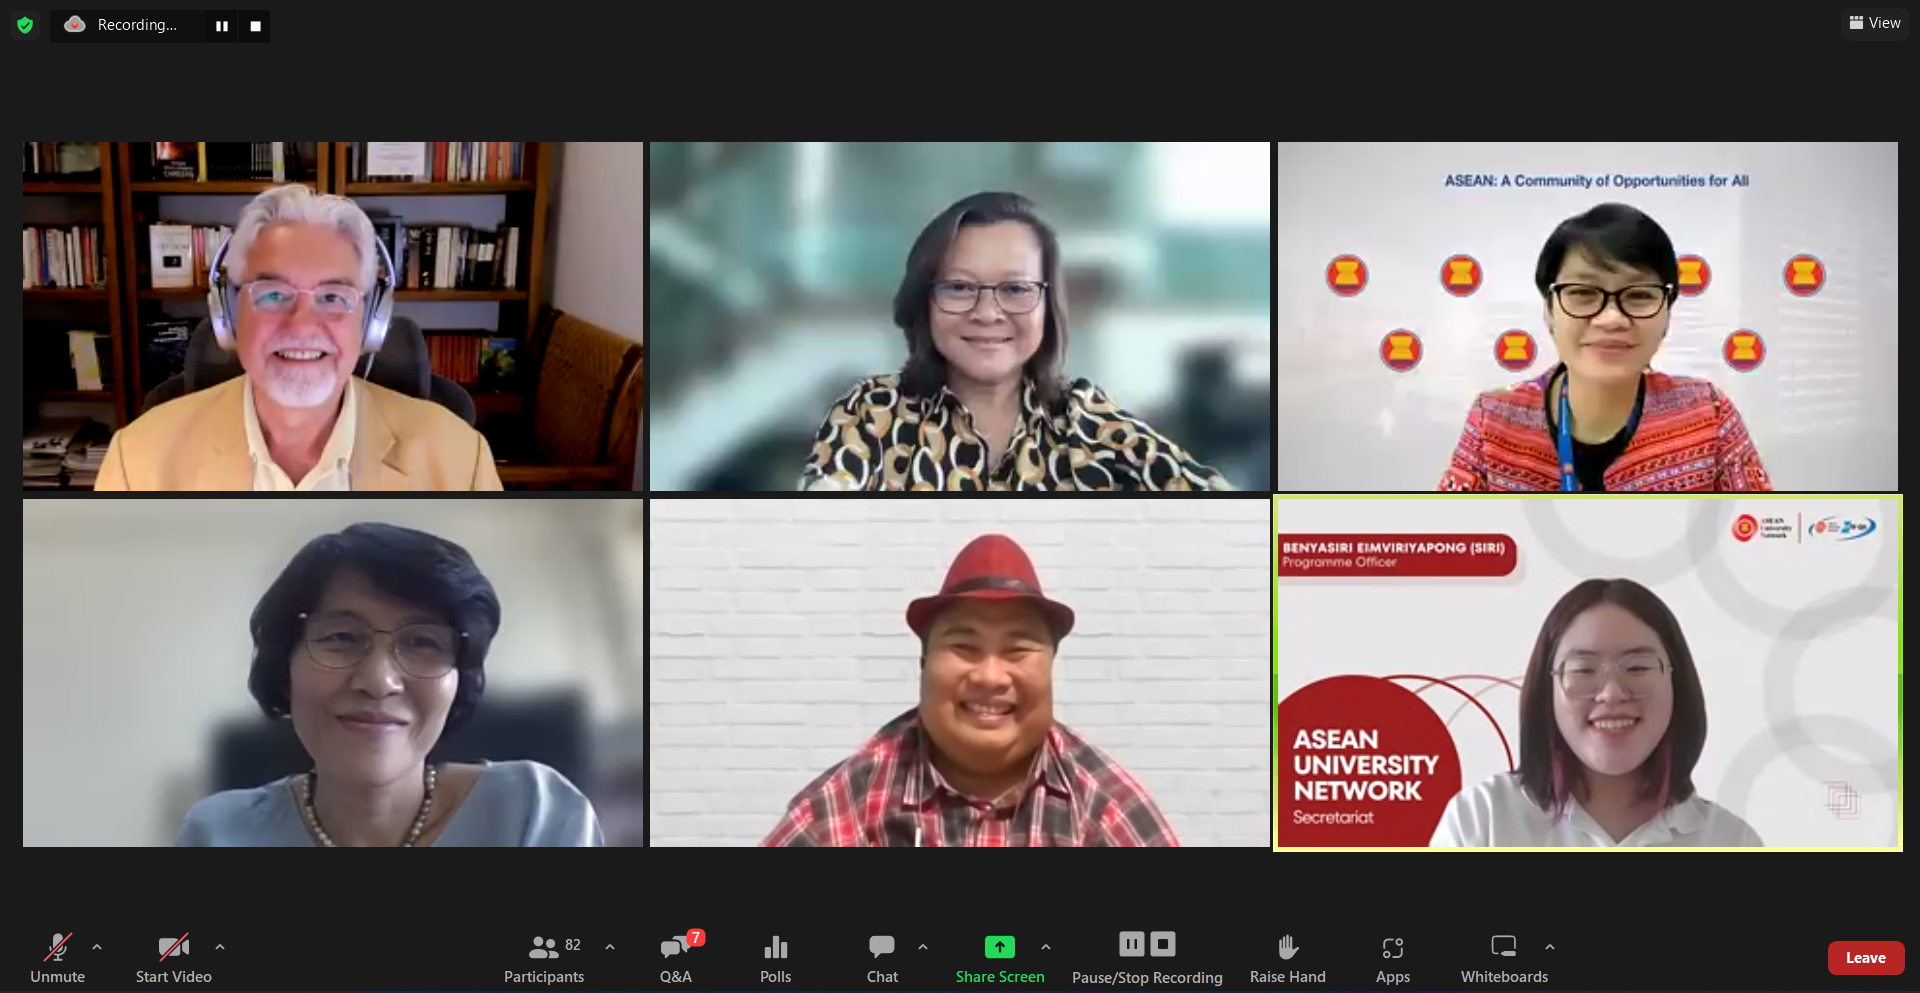 8th ECAAR Dialogue Webinar: “Ethics of Work and Human Development” Experts Gathered to Discuss What Future ASEAN Workplaces Should Look Like